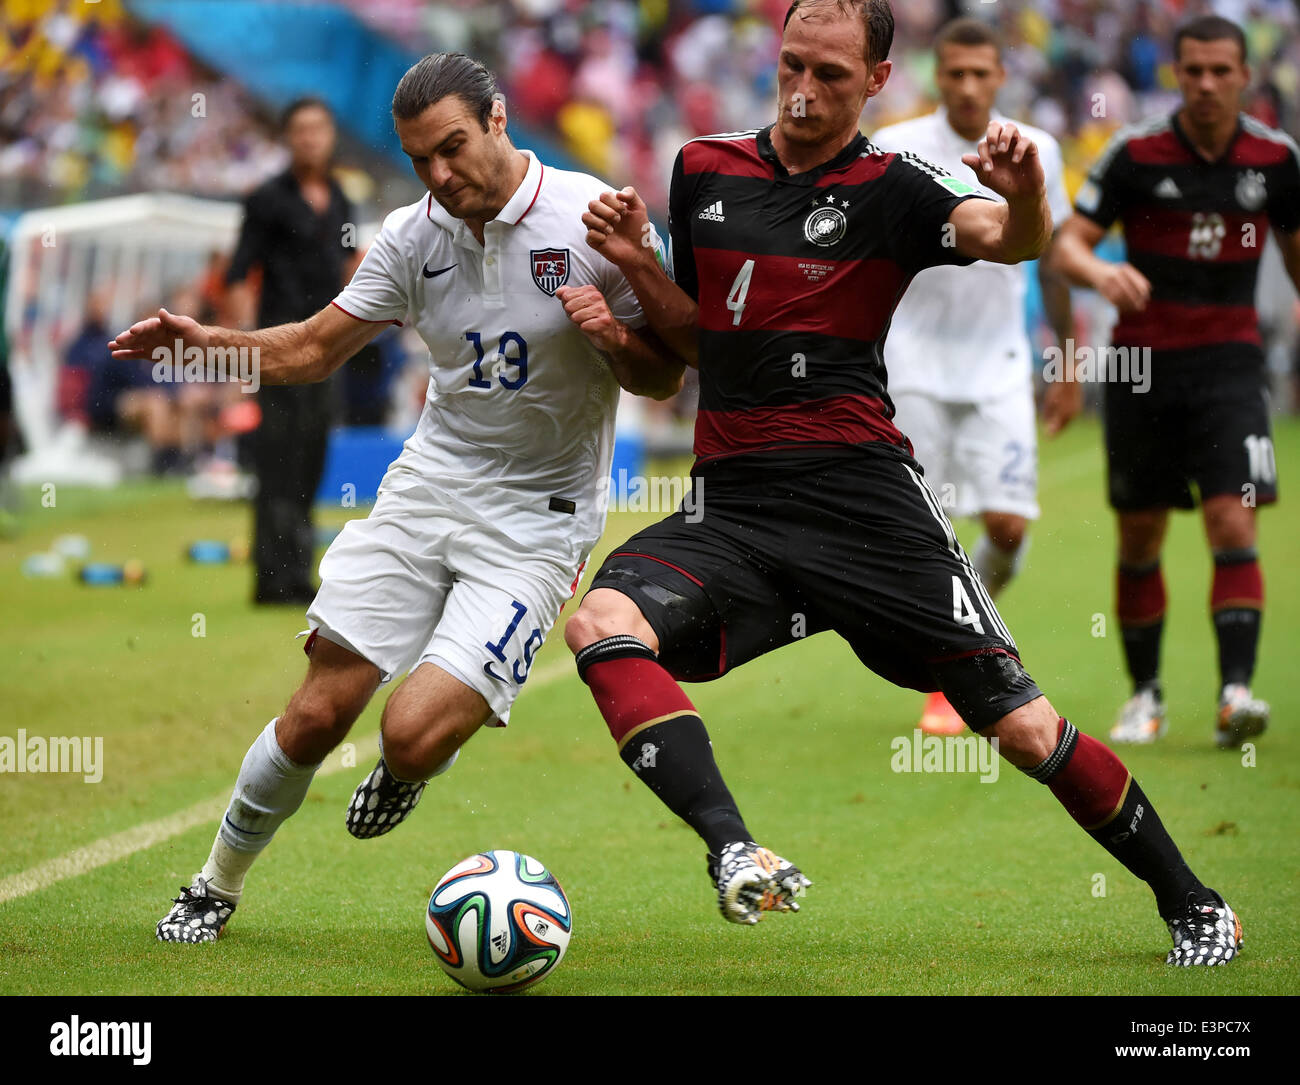 Recife, Brazil. 26th June, 2014. Germany's Benedikt Howedes (R, front) vies with Graham Zusi of the U.S. during a Group G match between the U.S. and Germany of 2014 FIFA World Cup at the Arena Pernambuco Stadium in Recife, Brazil, on June 26, 2014. Credit:  Guo Yong/Xinhua/Alamy Live News Stock Photo